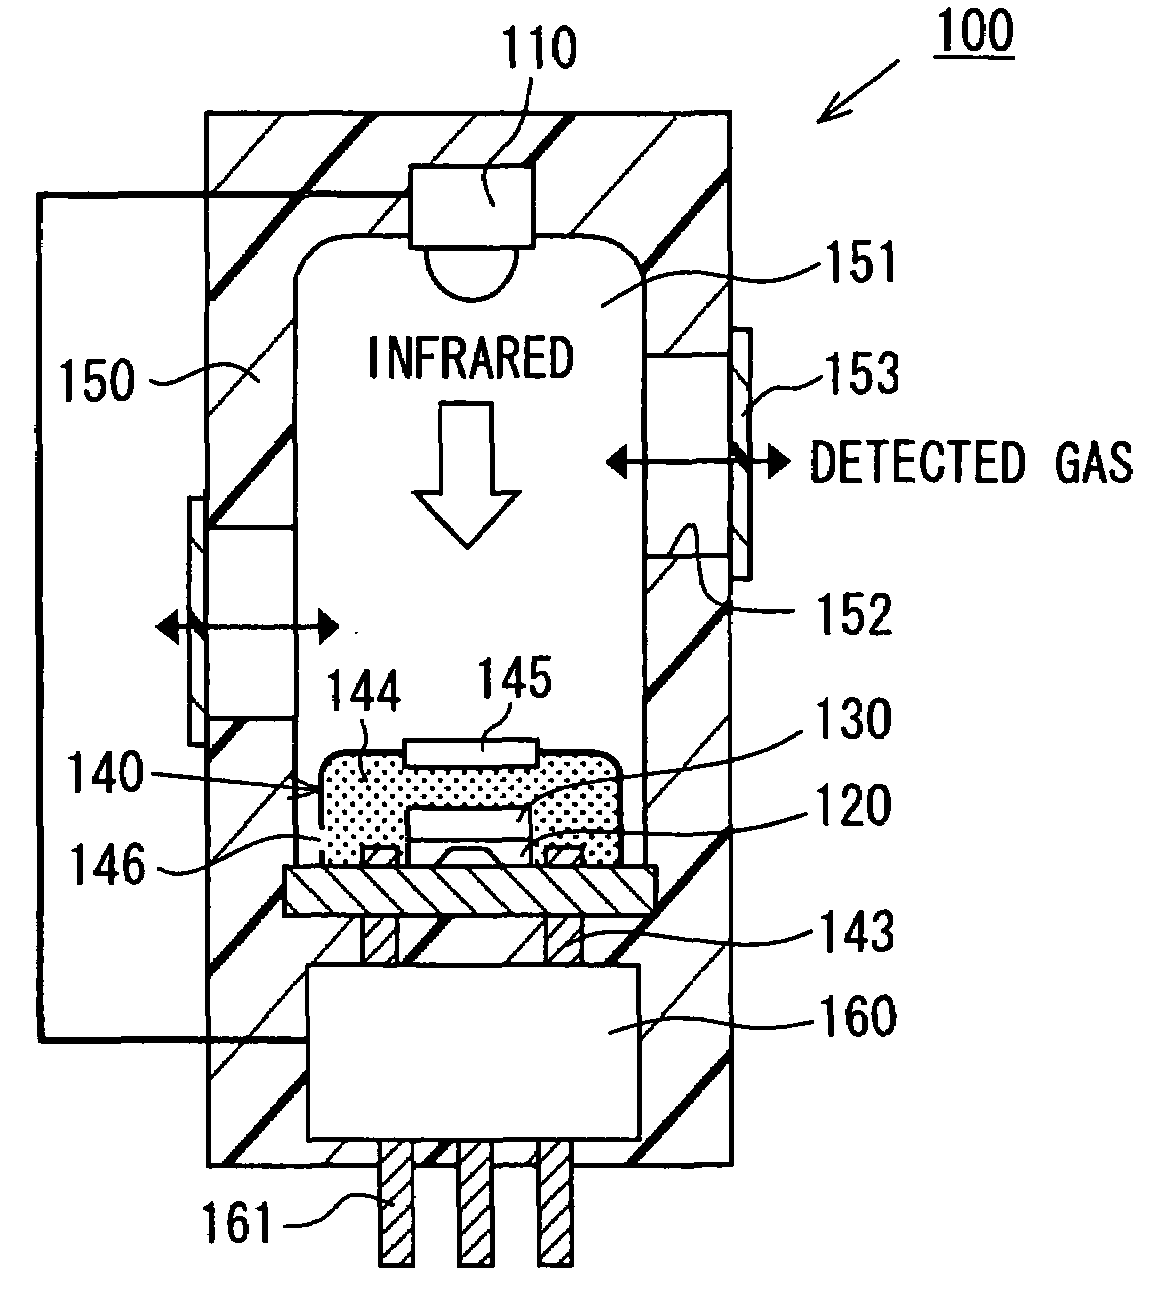 Infrared-type gas detector